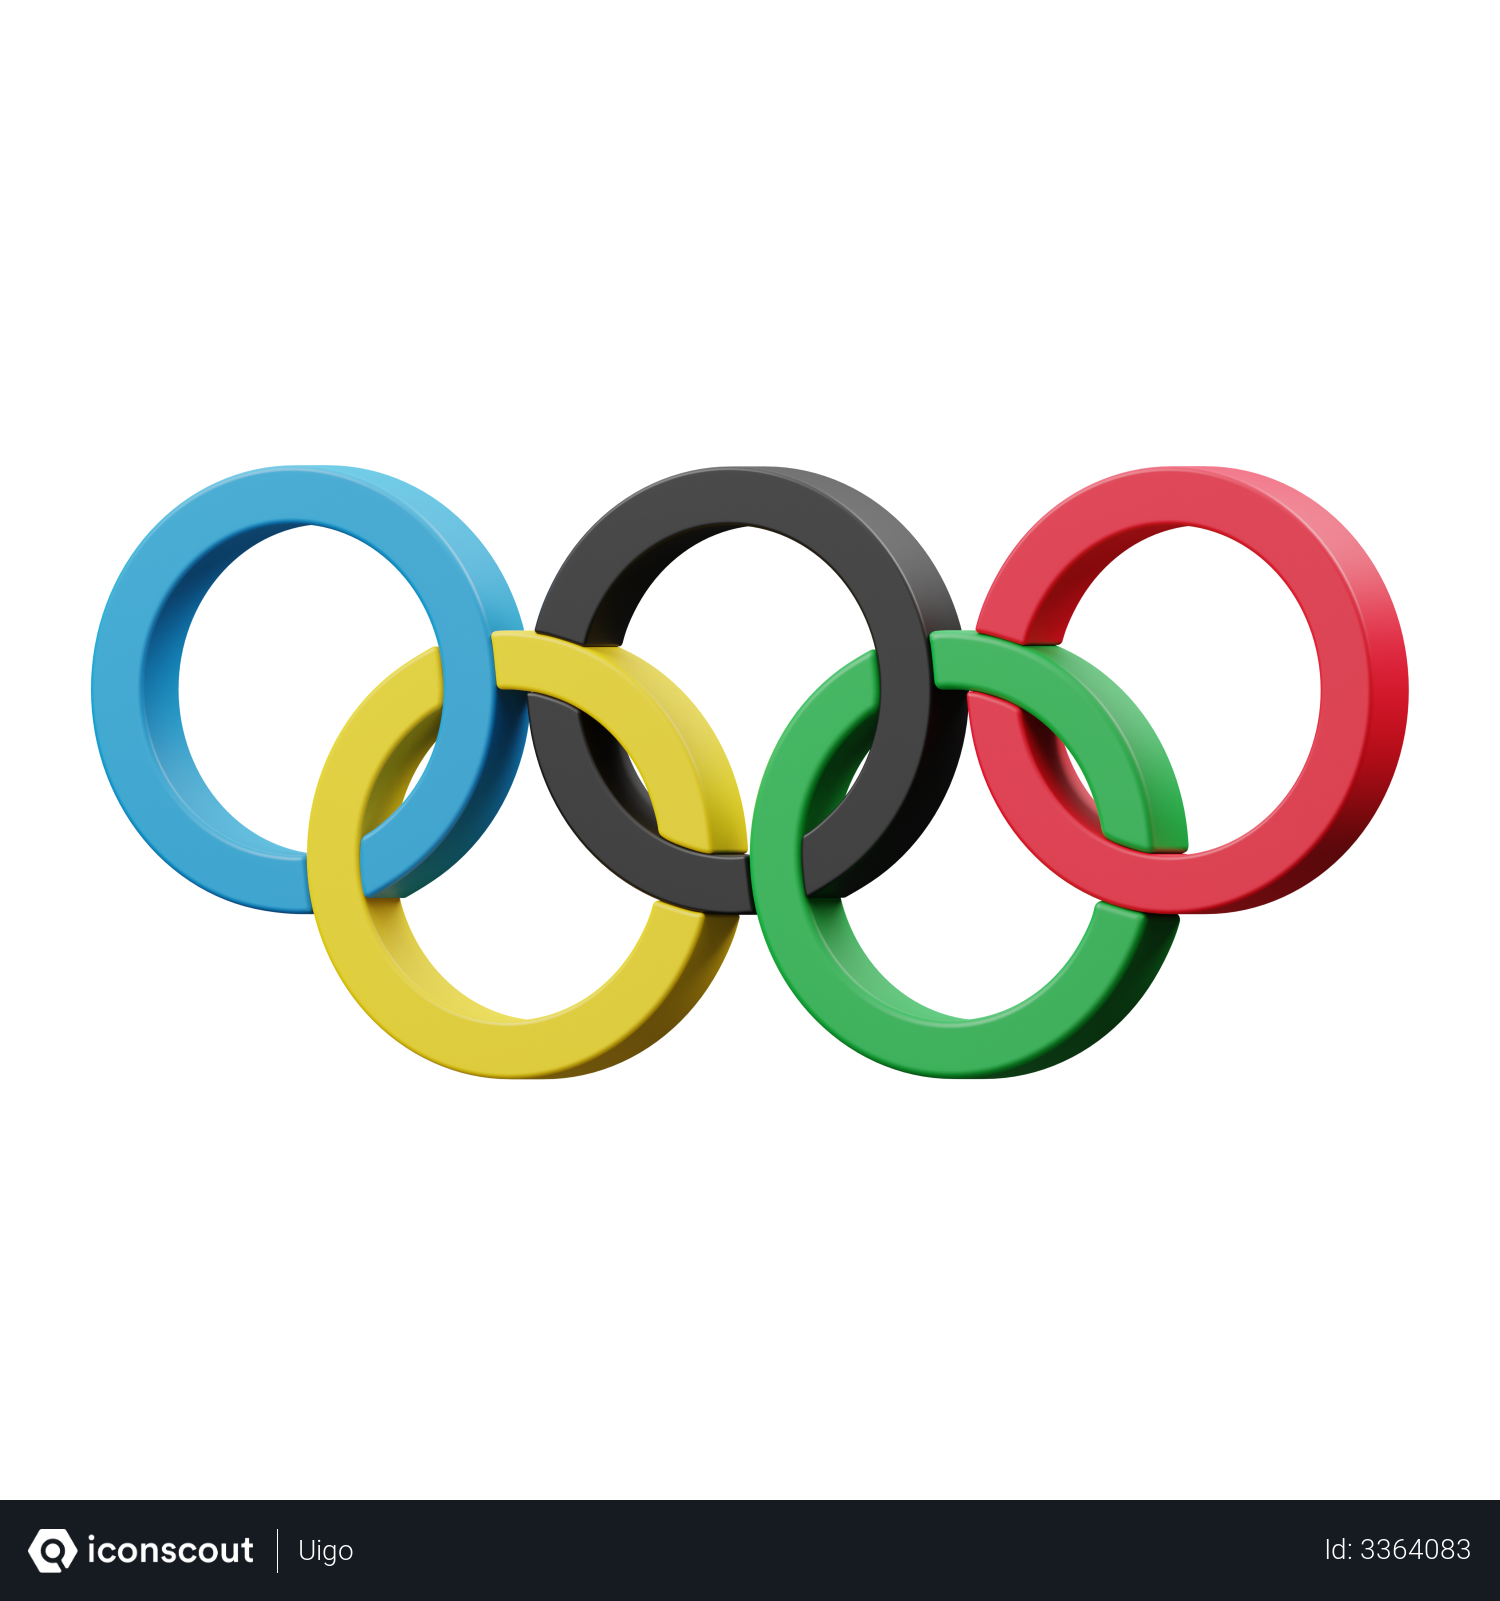 47 Olympic Logos and Symbols From 1924 to 2028 - Colorlib